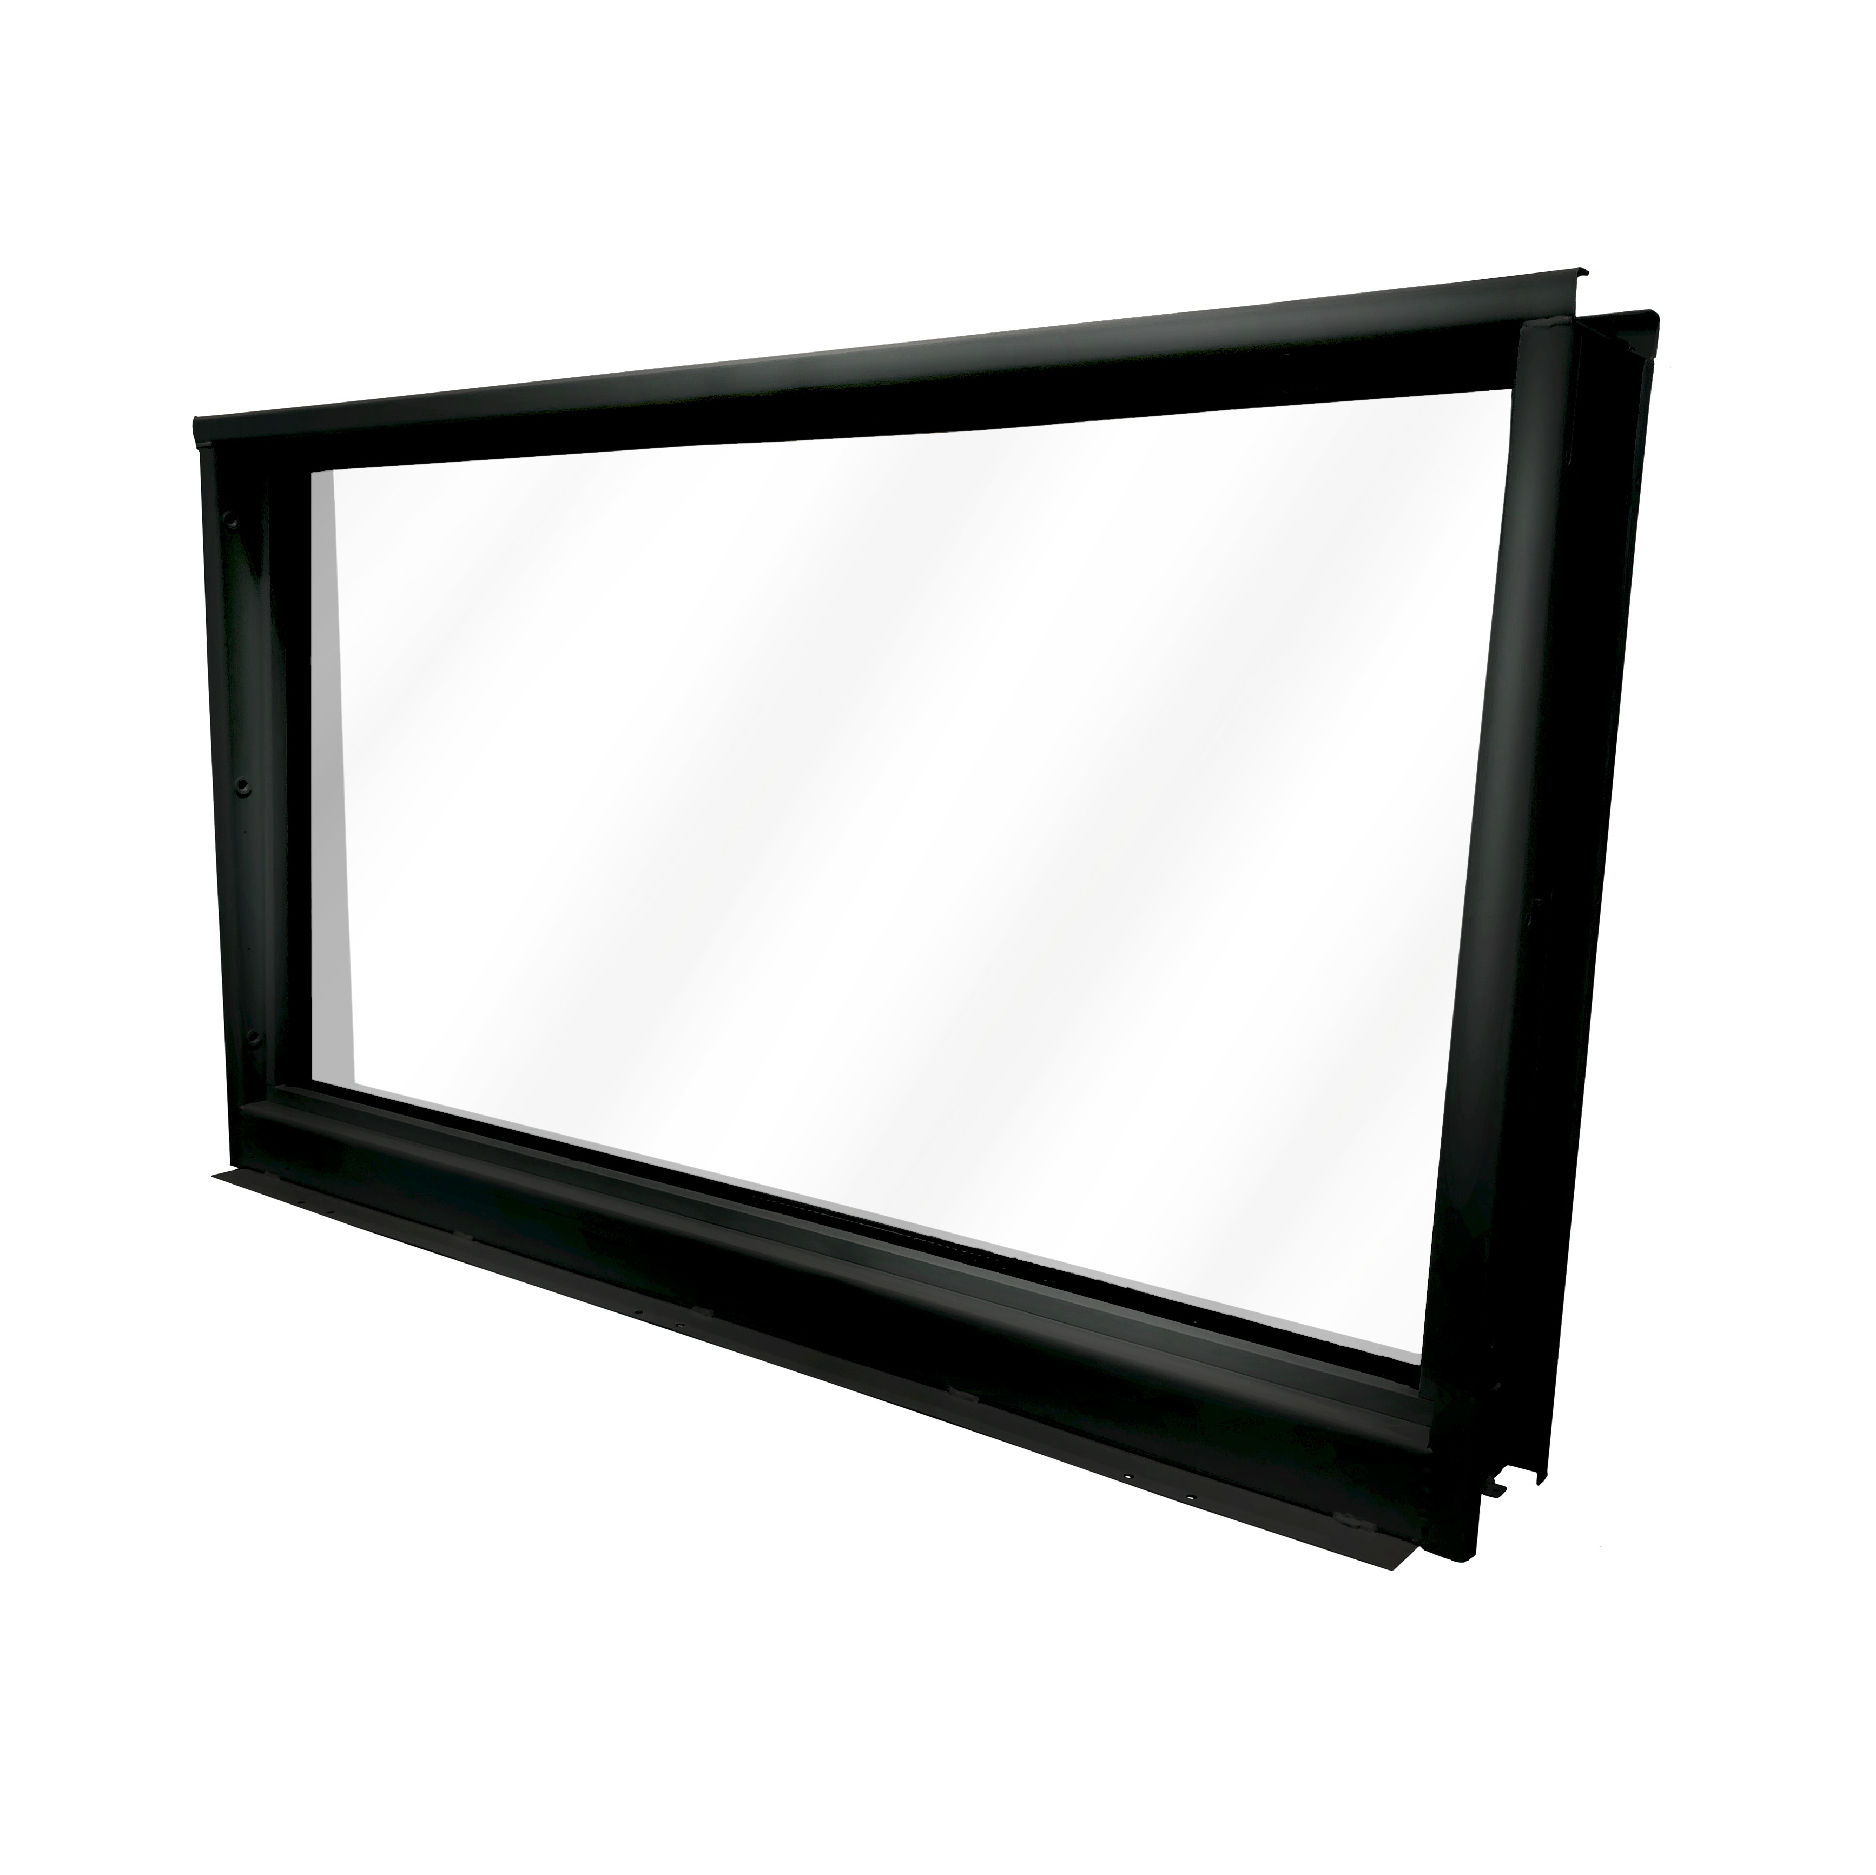 Picture for category 56x32 Premium Security Window - 12000994